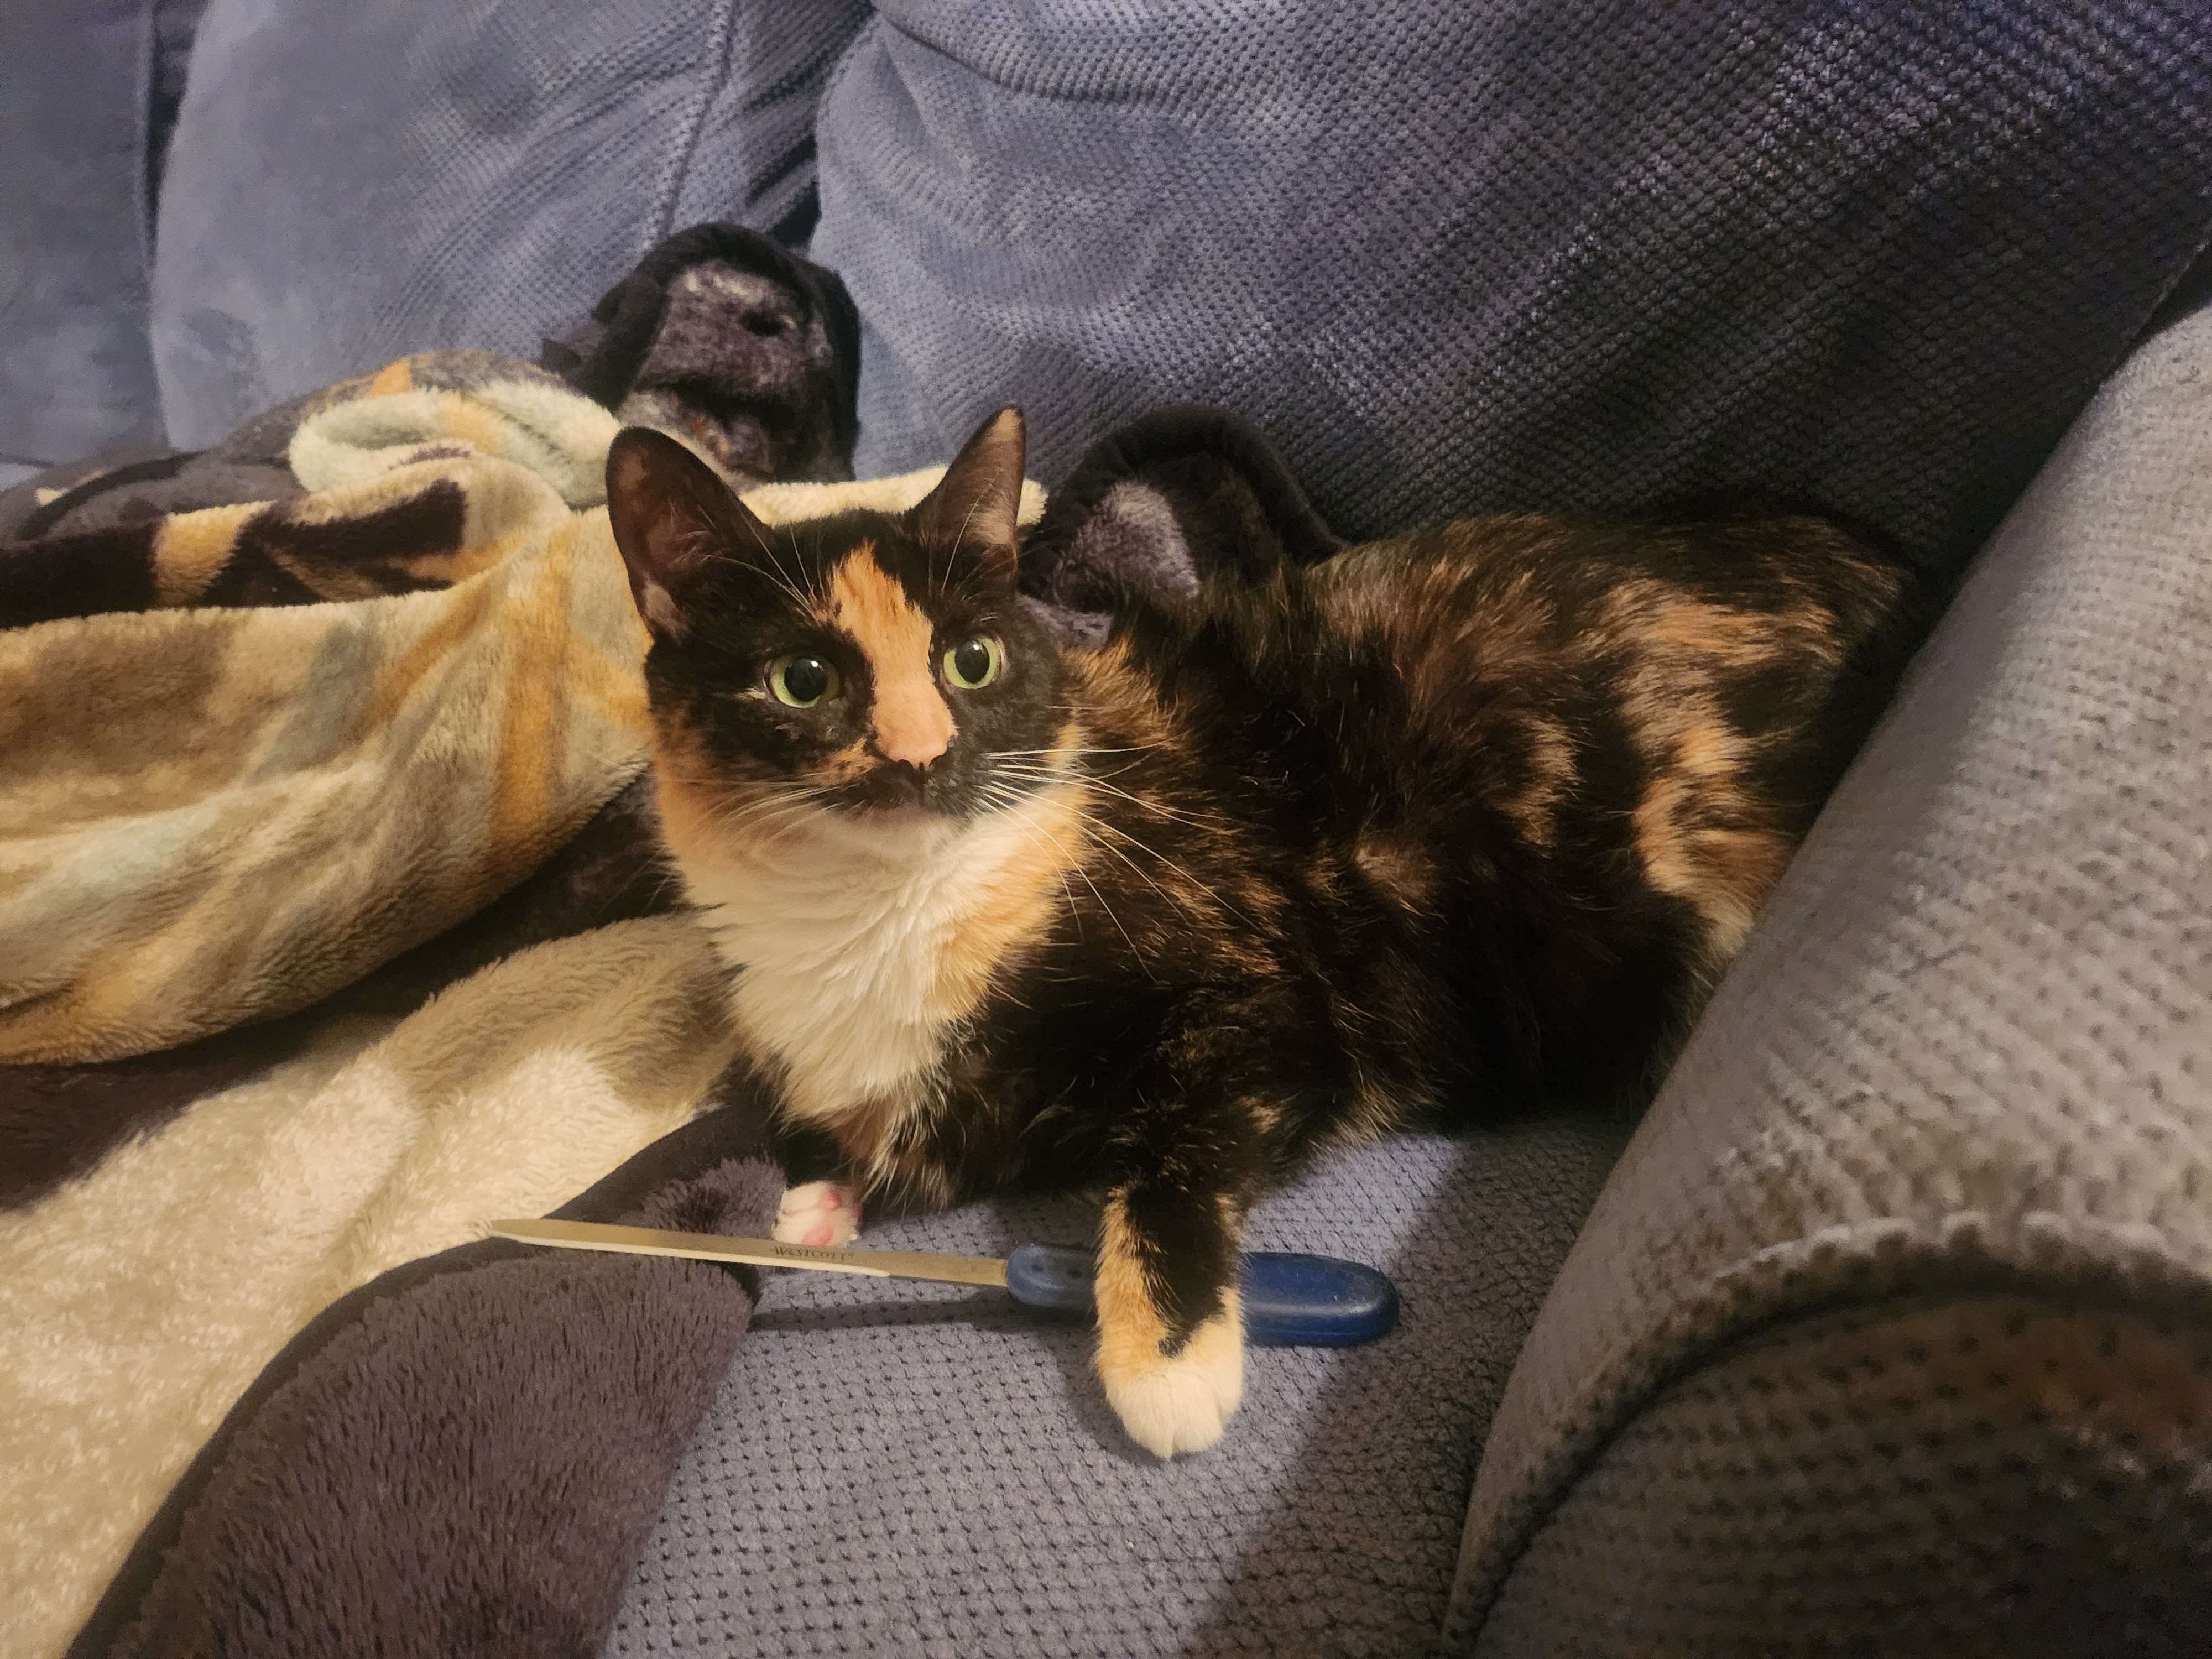 a calico cat on a couch with a letter opener.